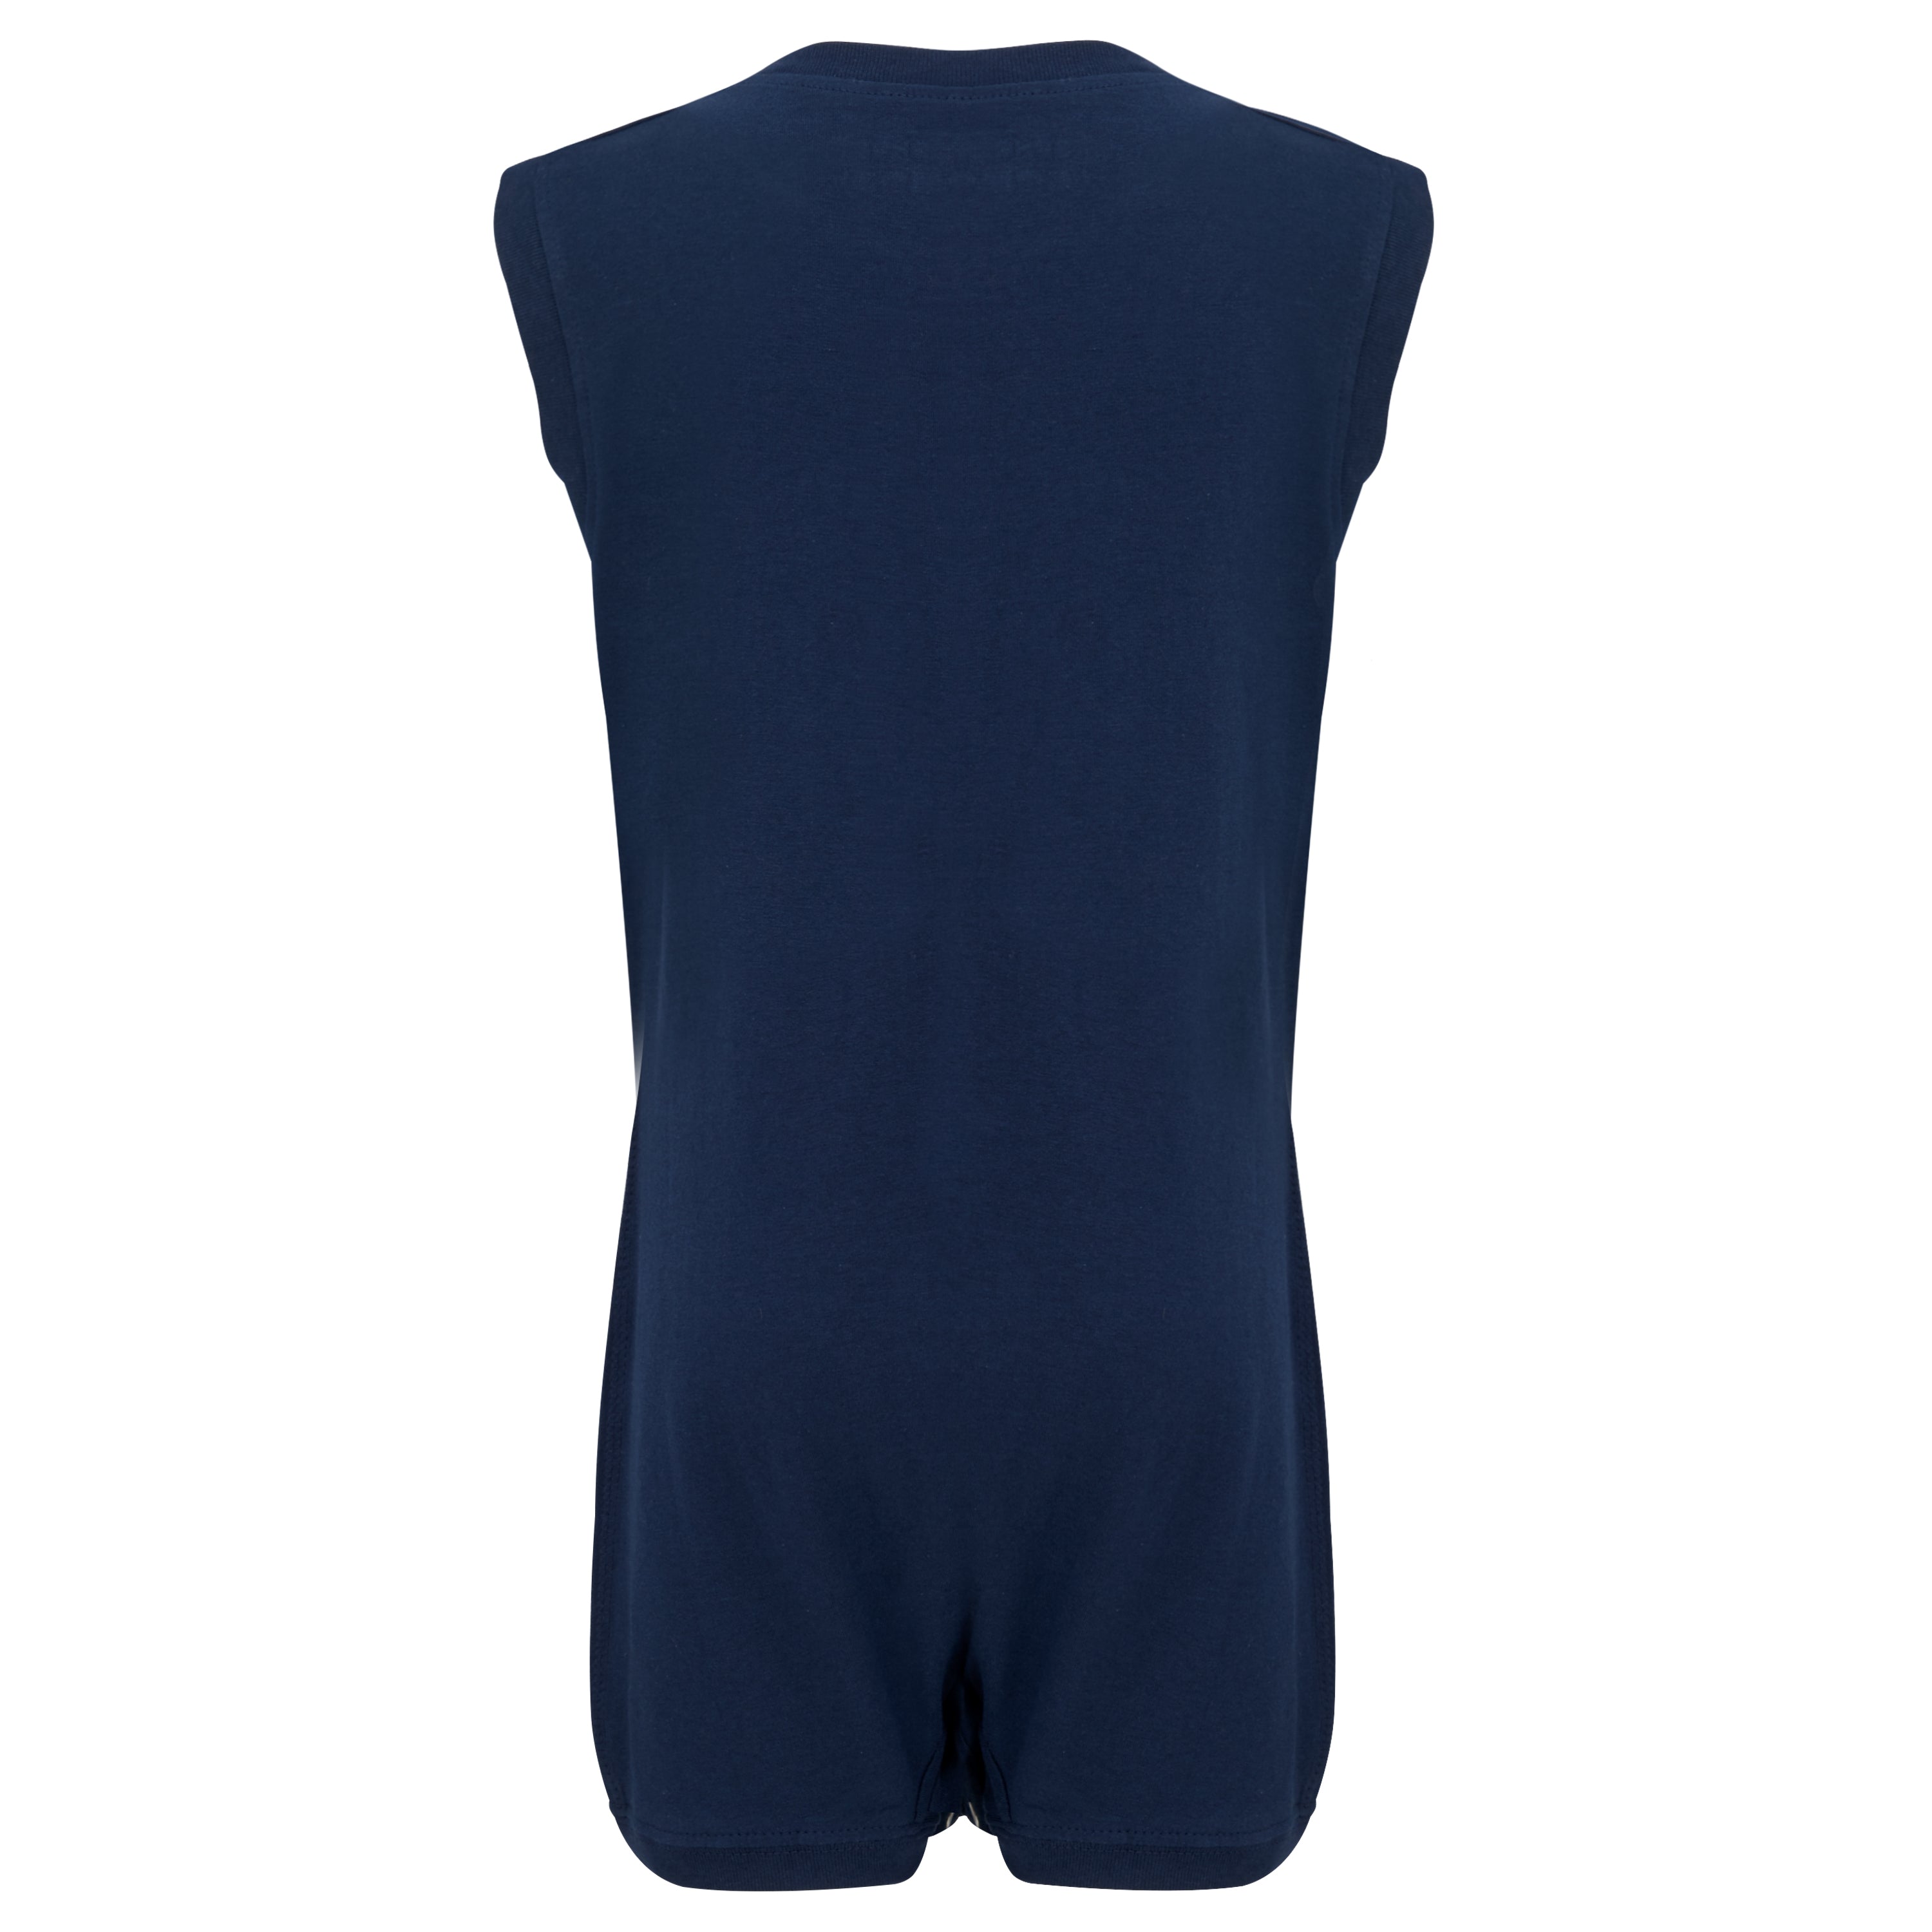 KayCey®P Super Soft Bodysuits - Sleeveless with Tube Access - Adults